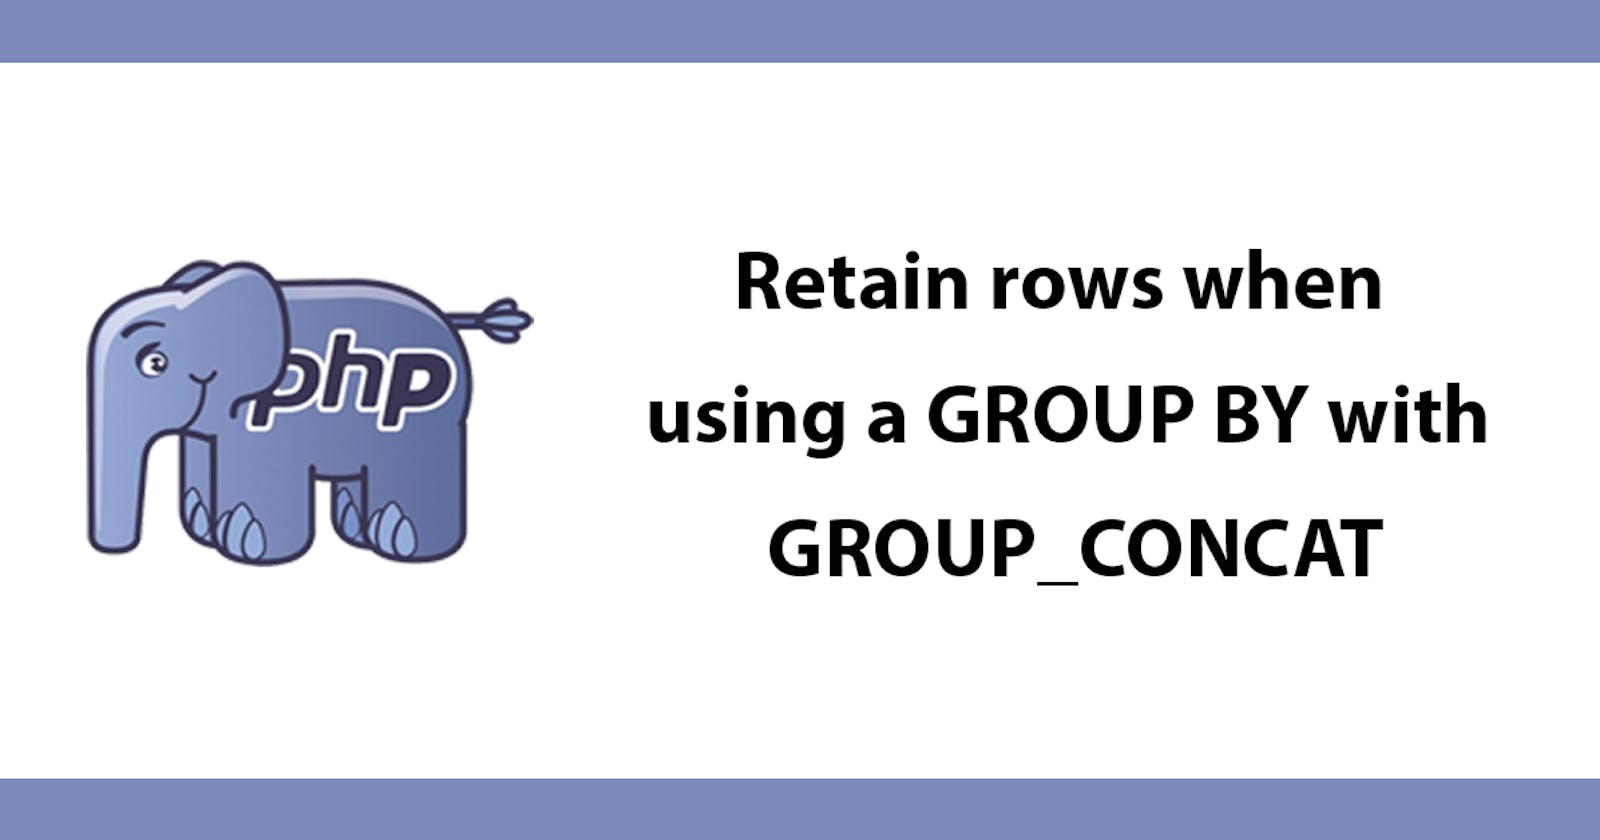 Retain rows when using a GROUP BY with GROUP_CONCAT